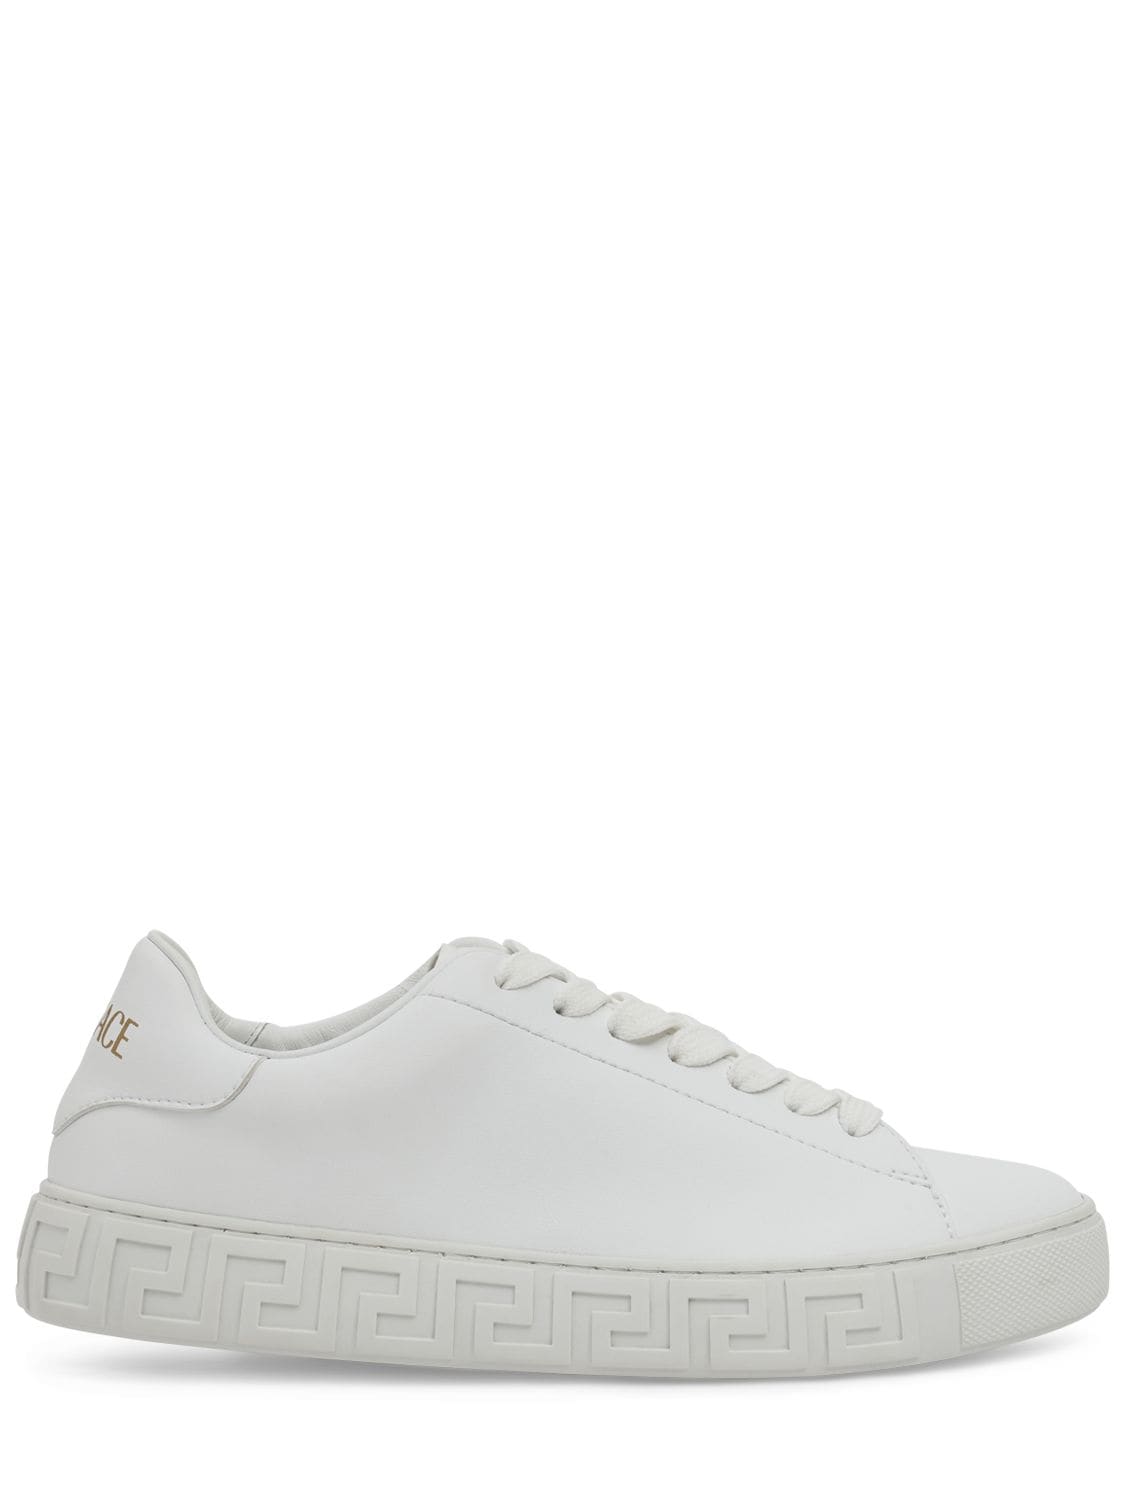 Versace Responsible皮革运动鞋 In 1w010-white